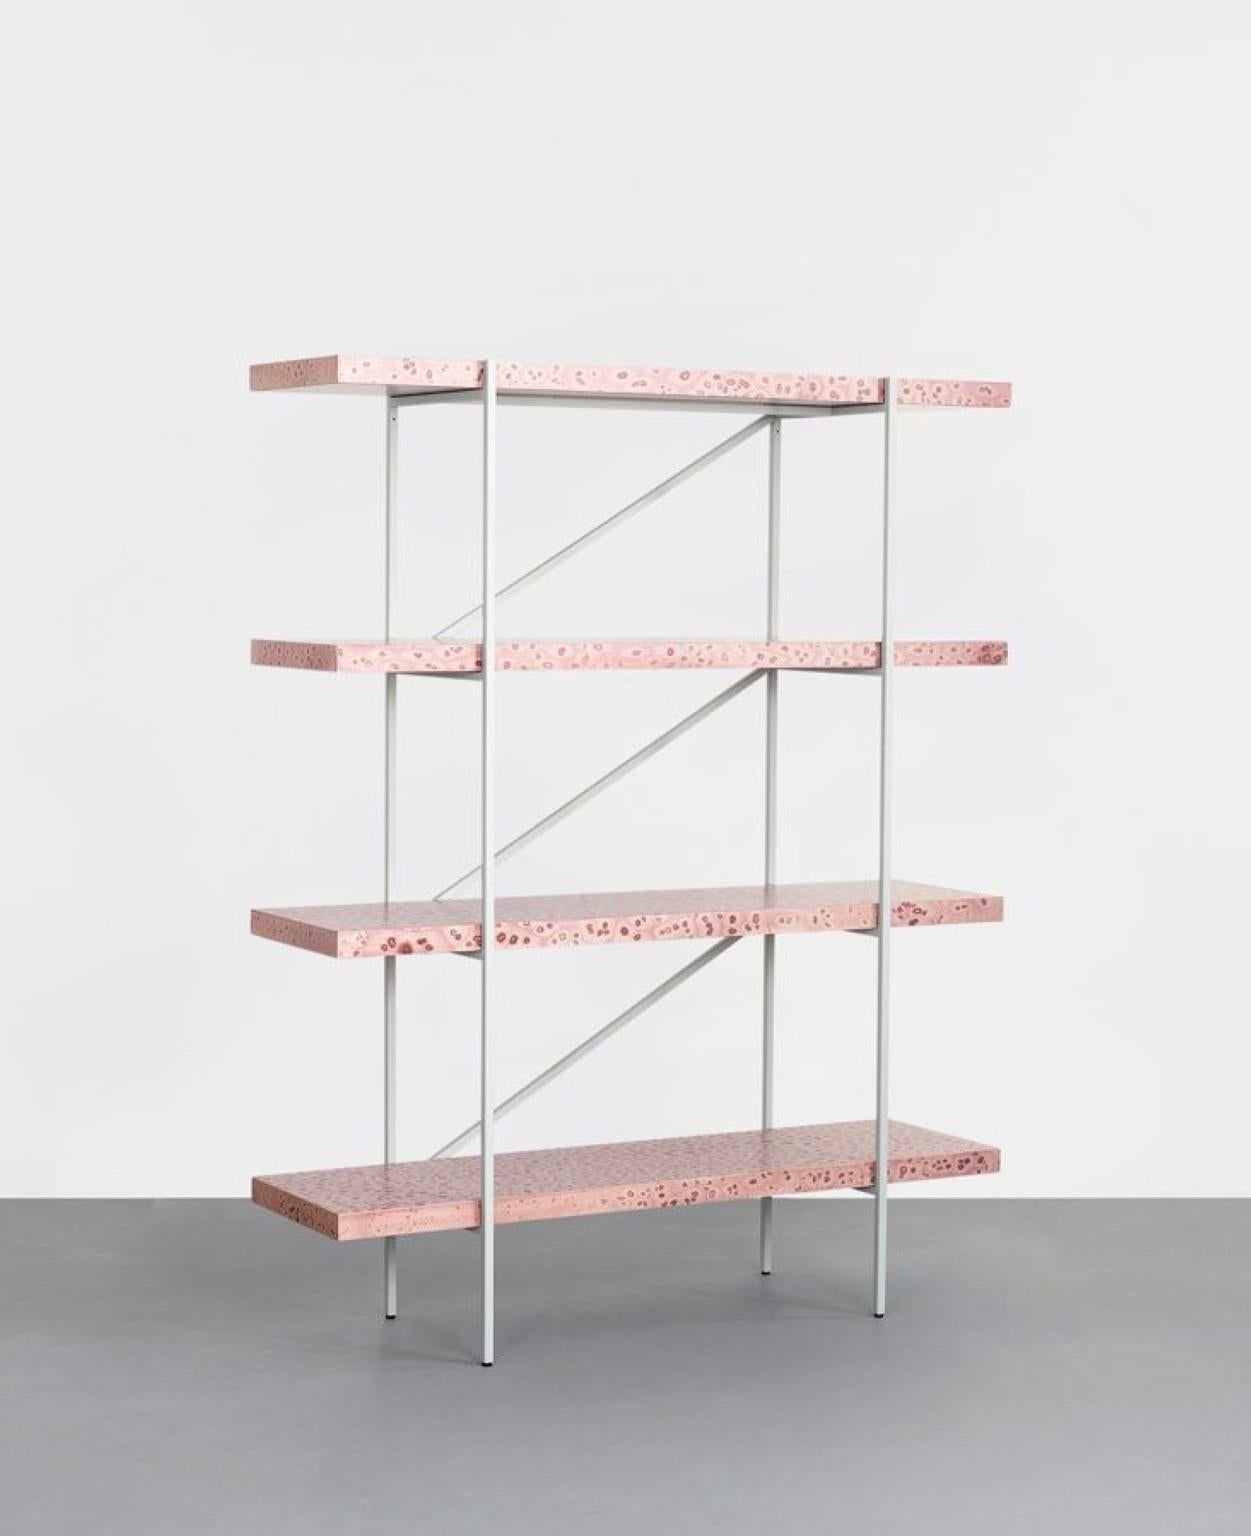 Pale Berry Osis Shelving by Llot Llov
Edition 2
Dimensions: W 140 x D 35 x H 175 cm
Materials: core board birch, powder coated steel

LLOT LLOV produce exclusive furniture and objects for private or corporate clients and also manage interior design